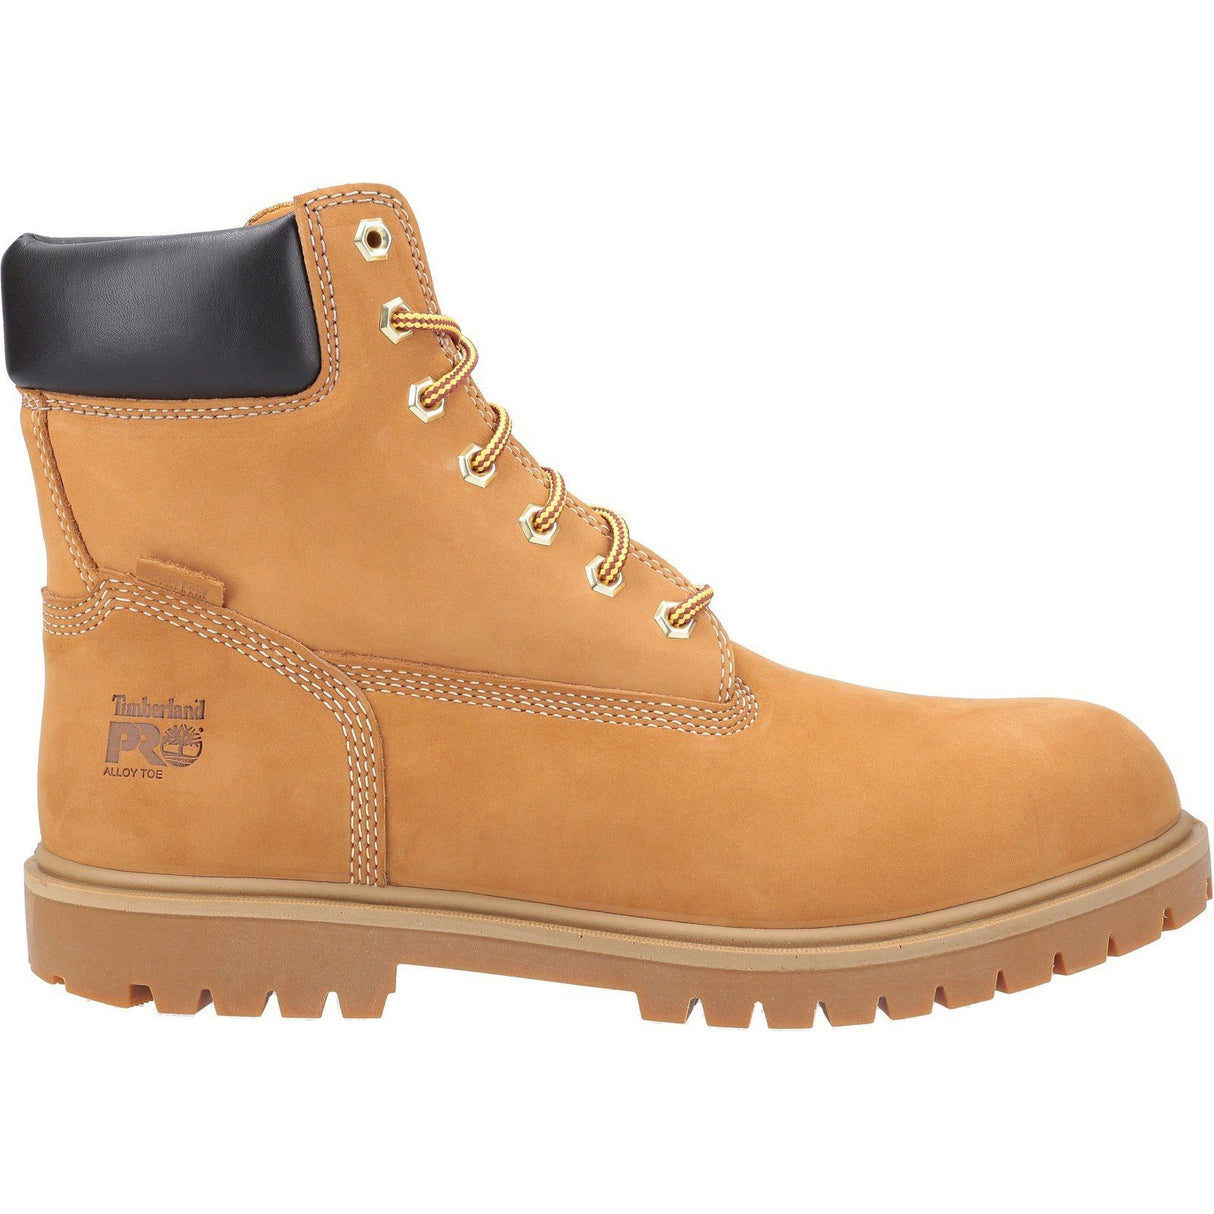 Timberland Pro Iconic Safety Boots